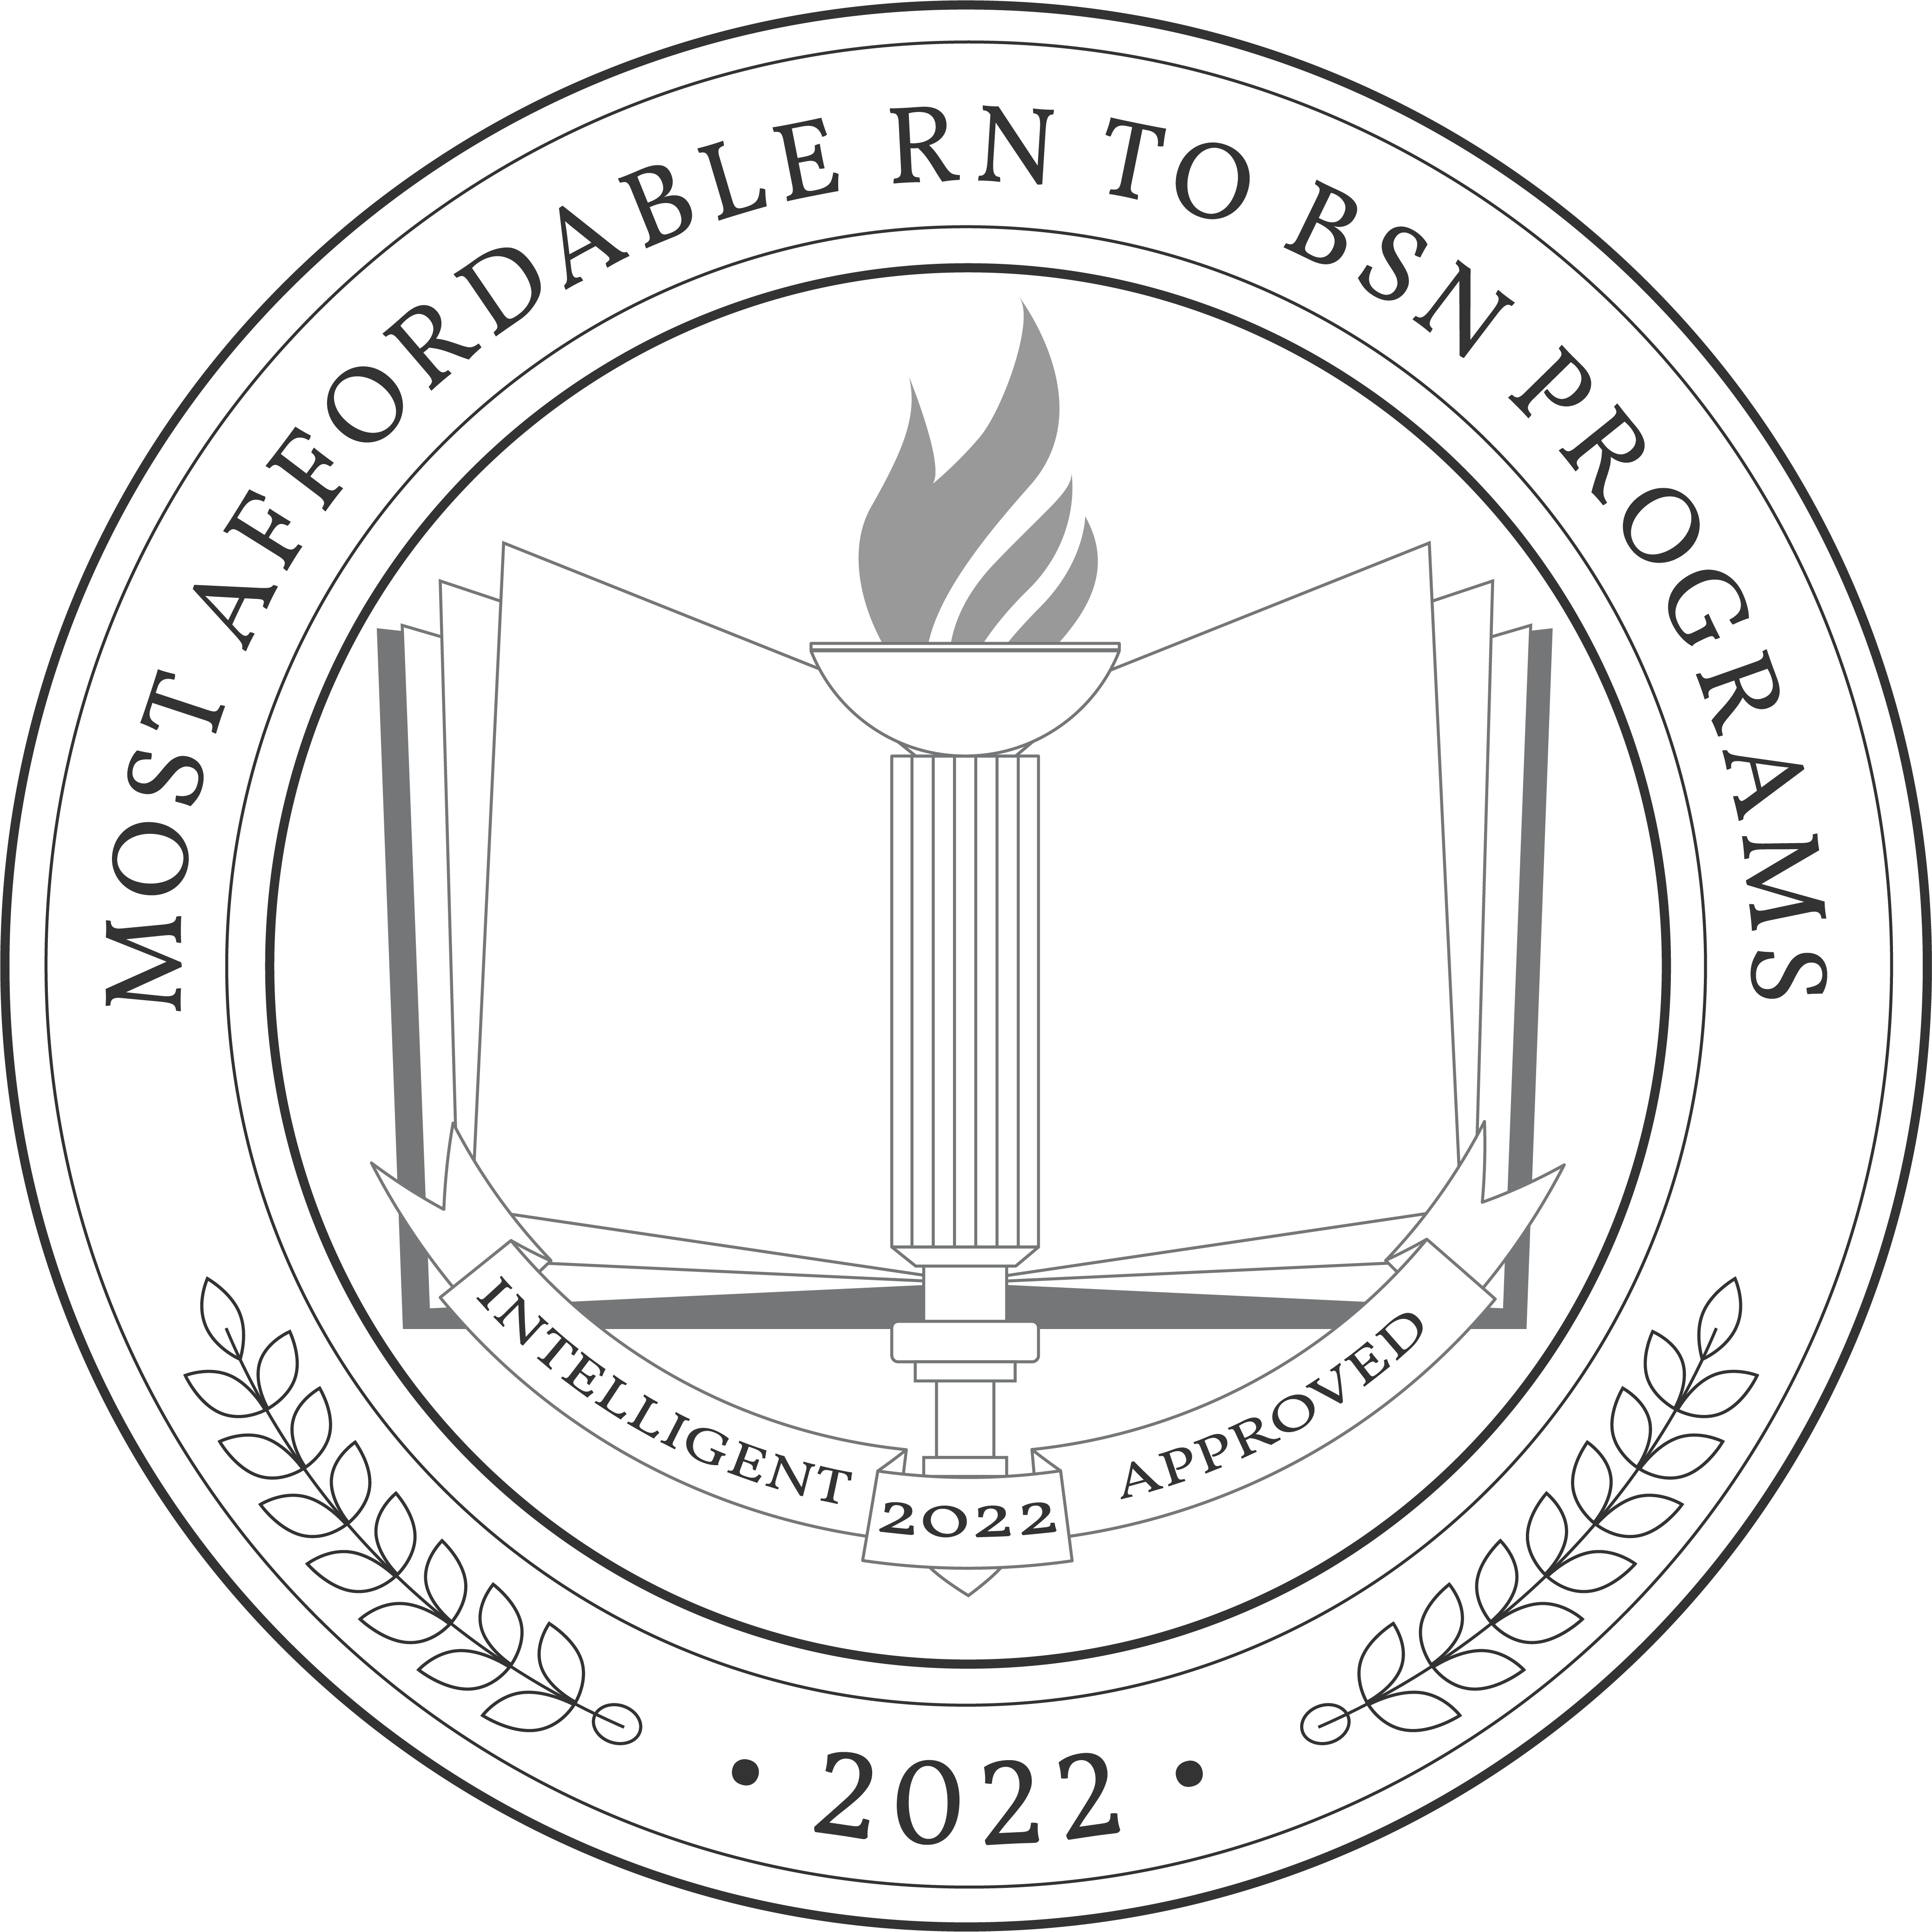 Most Affordable RN to BSN Programs Badge